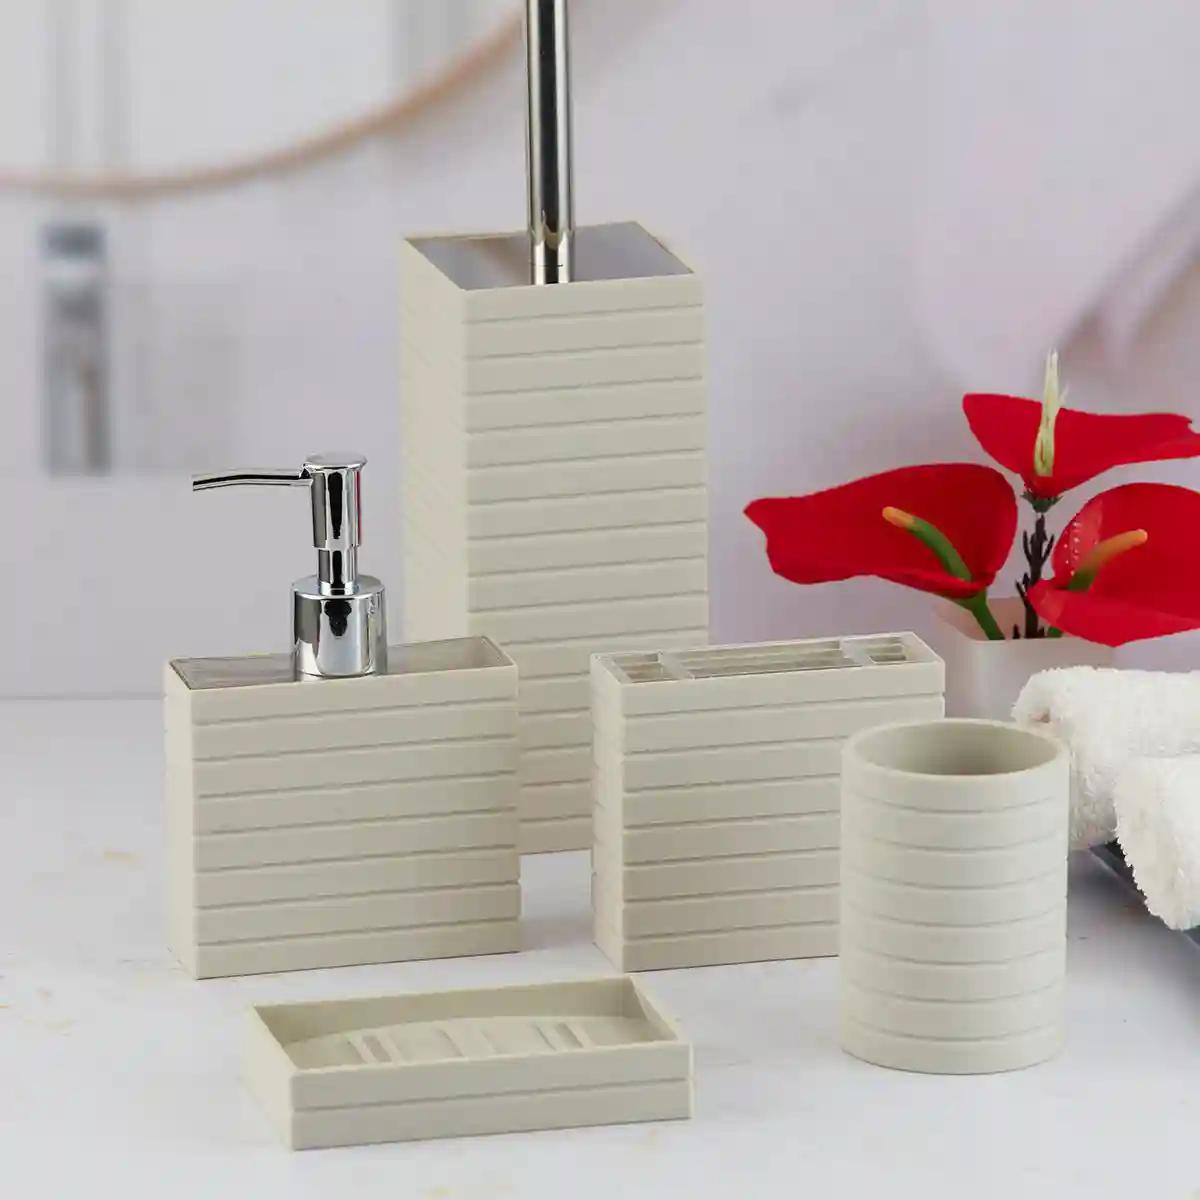 Kookee Acrylic Bathroom Accessories Set of 5, Modern Acrylic Bath Set with Liquid Soap Dispenser and Toothbrush Holder, Bathroom Accessory Set with Toilet Brush Gift Items for Home - Beige (10035)